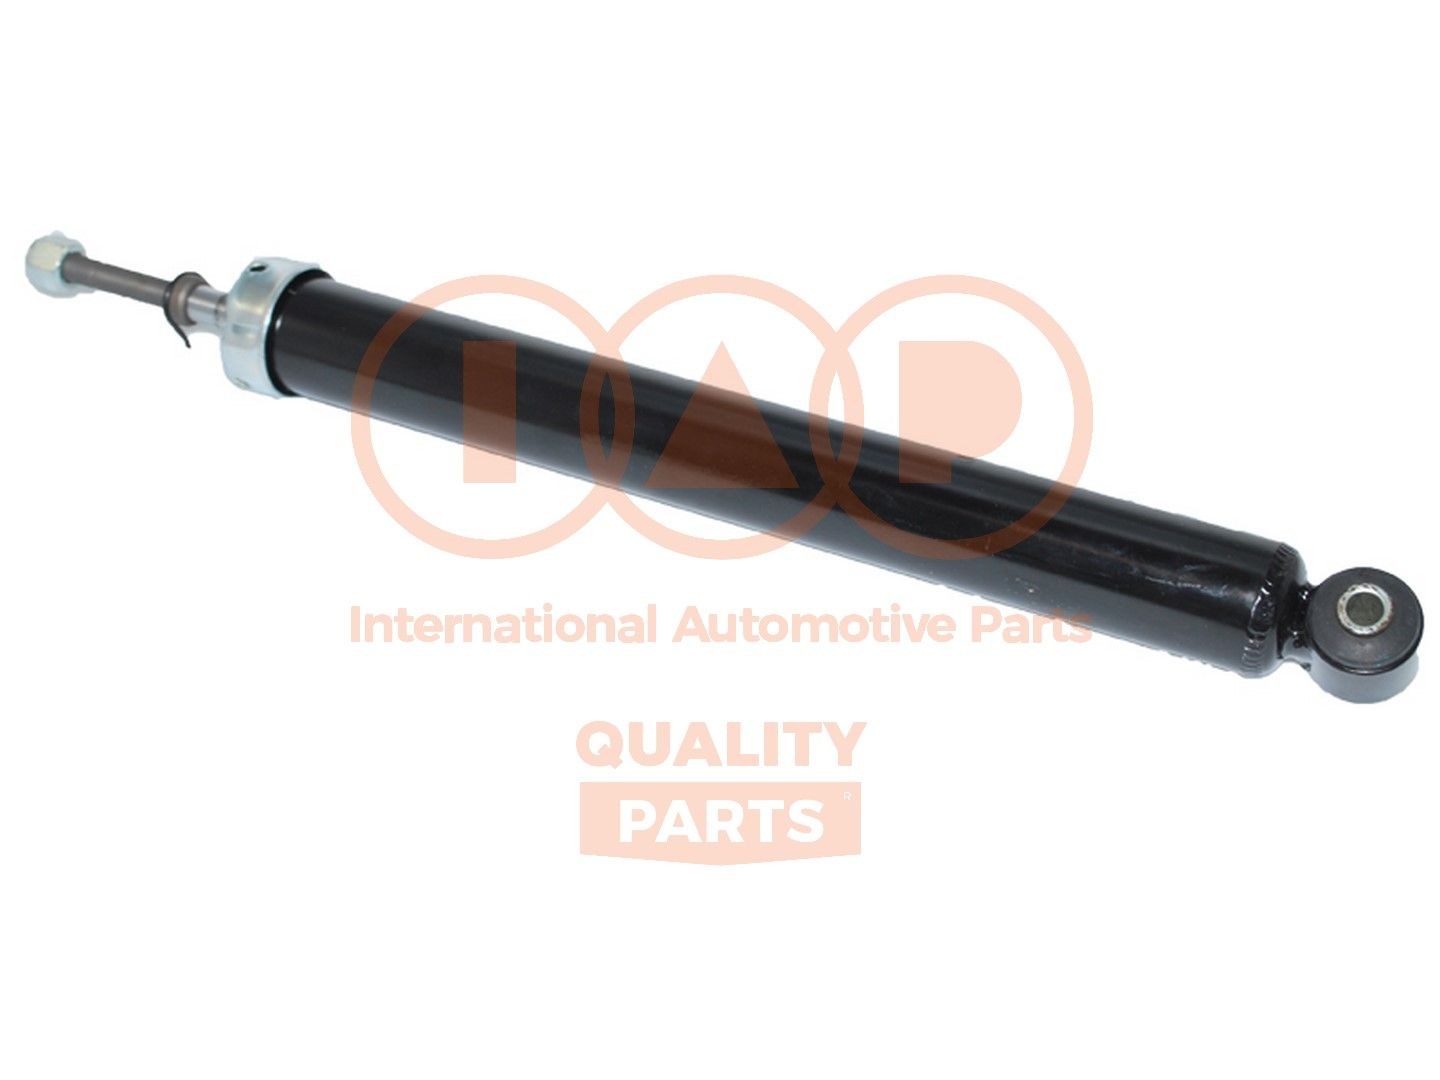 IAP QUALITY PARTS 504-17109 Shock absorber 48530 0D 450